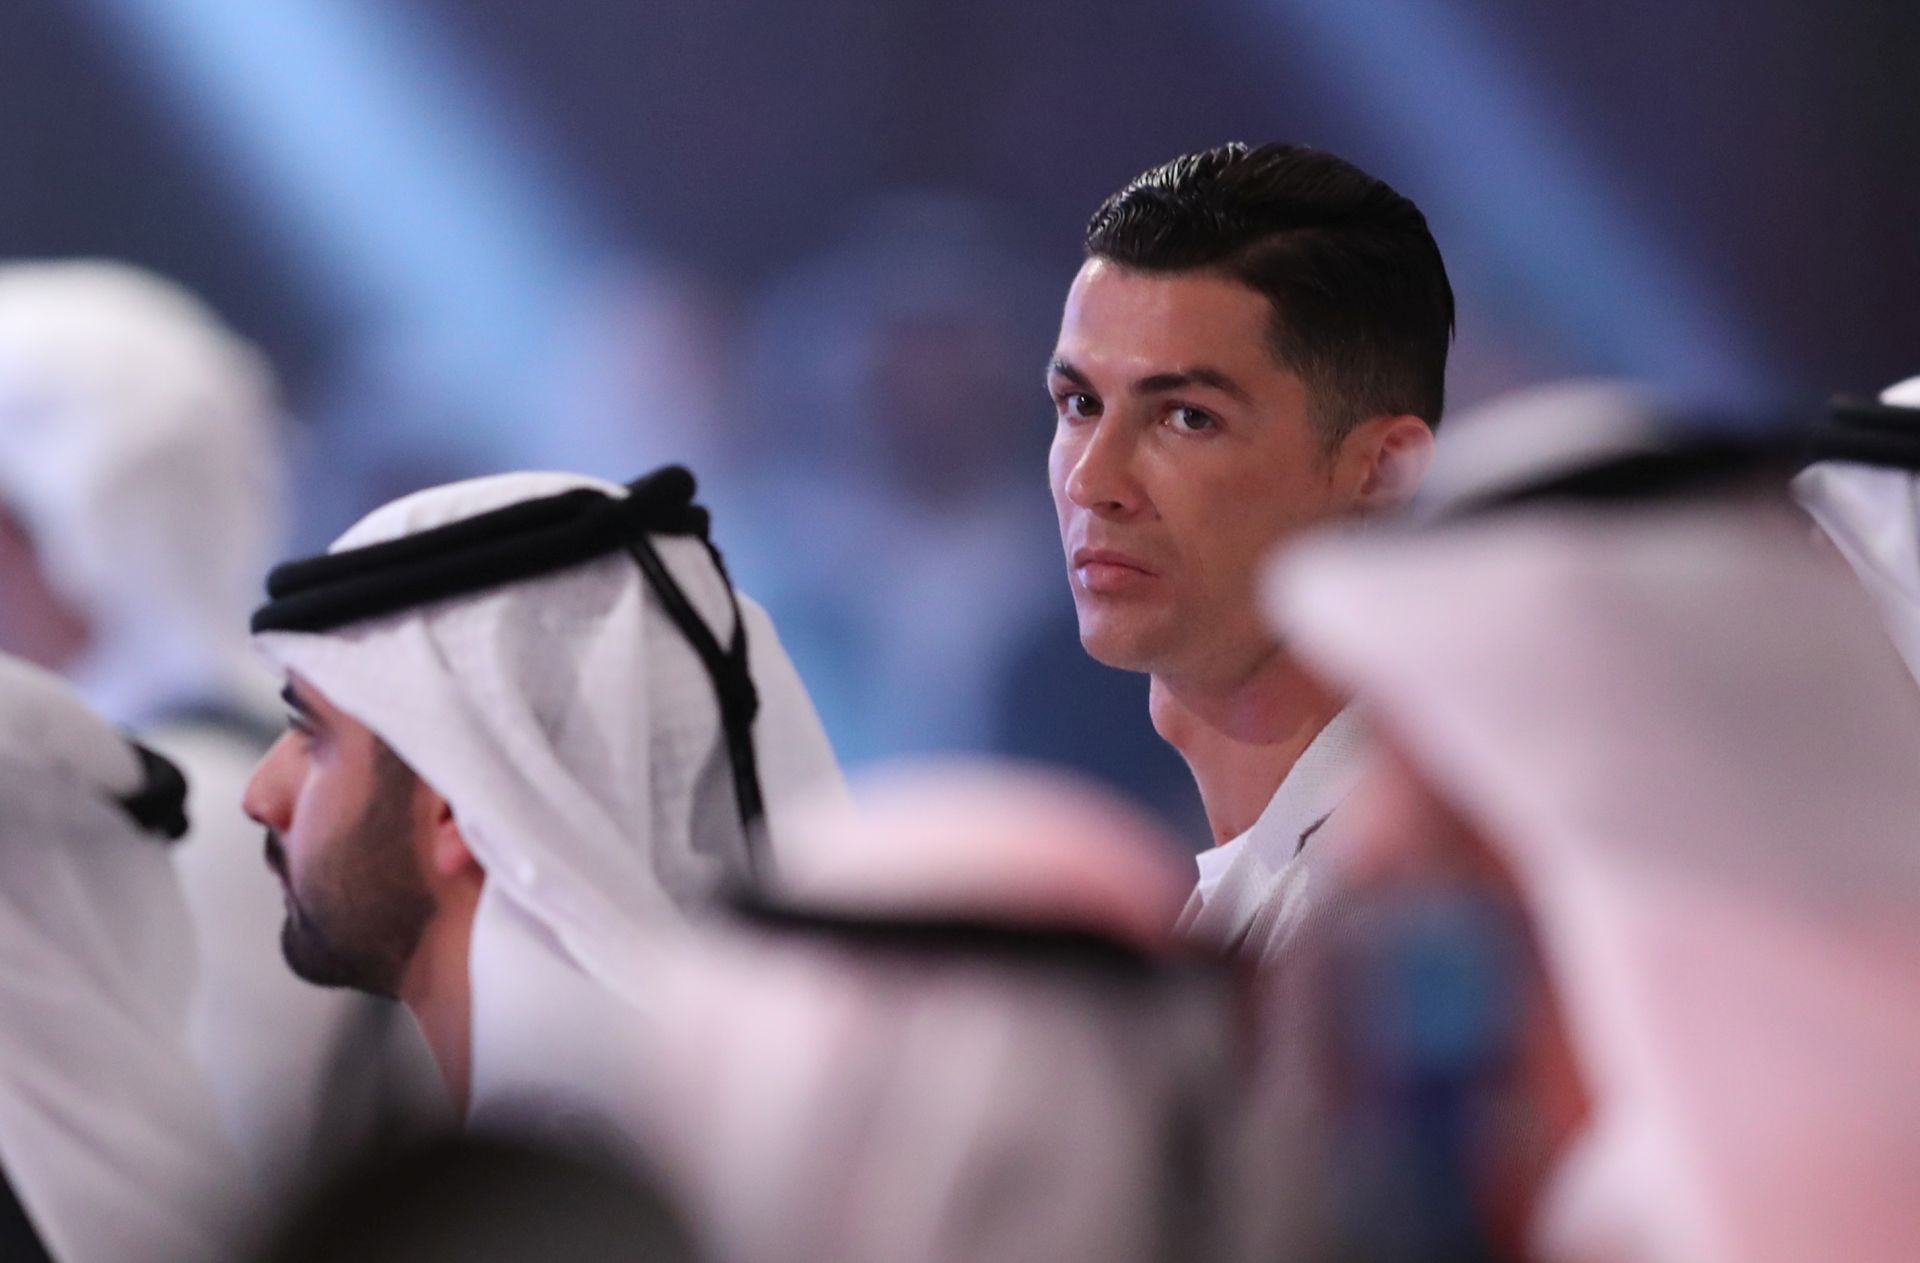 epa08092365 Cristiano Ronaldo (R), Portuguese National Team and Italy's Juventus FC player attends the first day of the Dubai International Sports Conference in Dubai, United Arab Emirates, 28 December 2019. This year is the 14th Dubai International Sports Conference.  EPA/ALI HAIDER